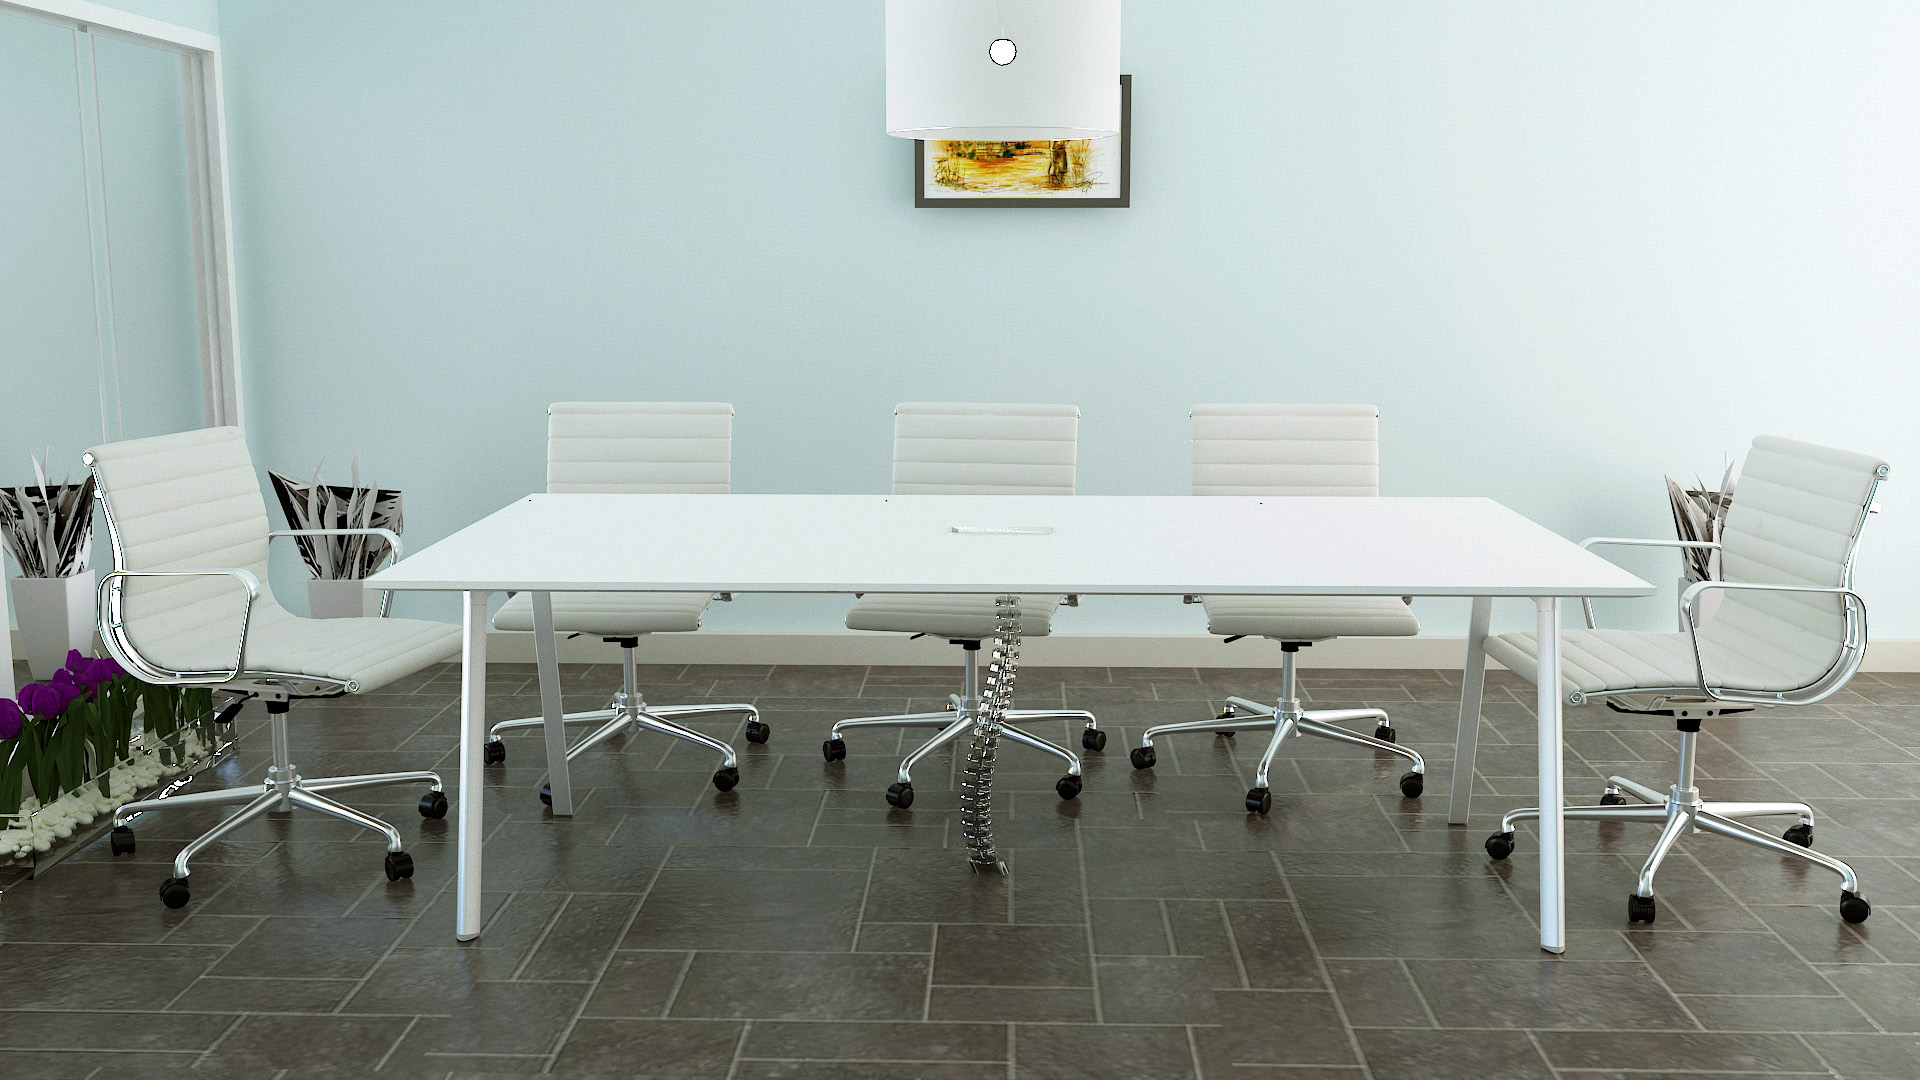 Fad Conference Table With Wire Management & Metal Leg  (L240 x W120 x H75)